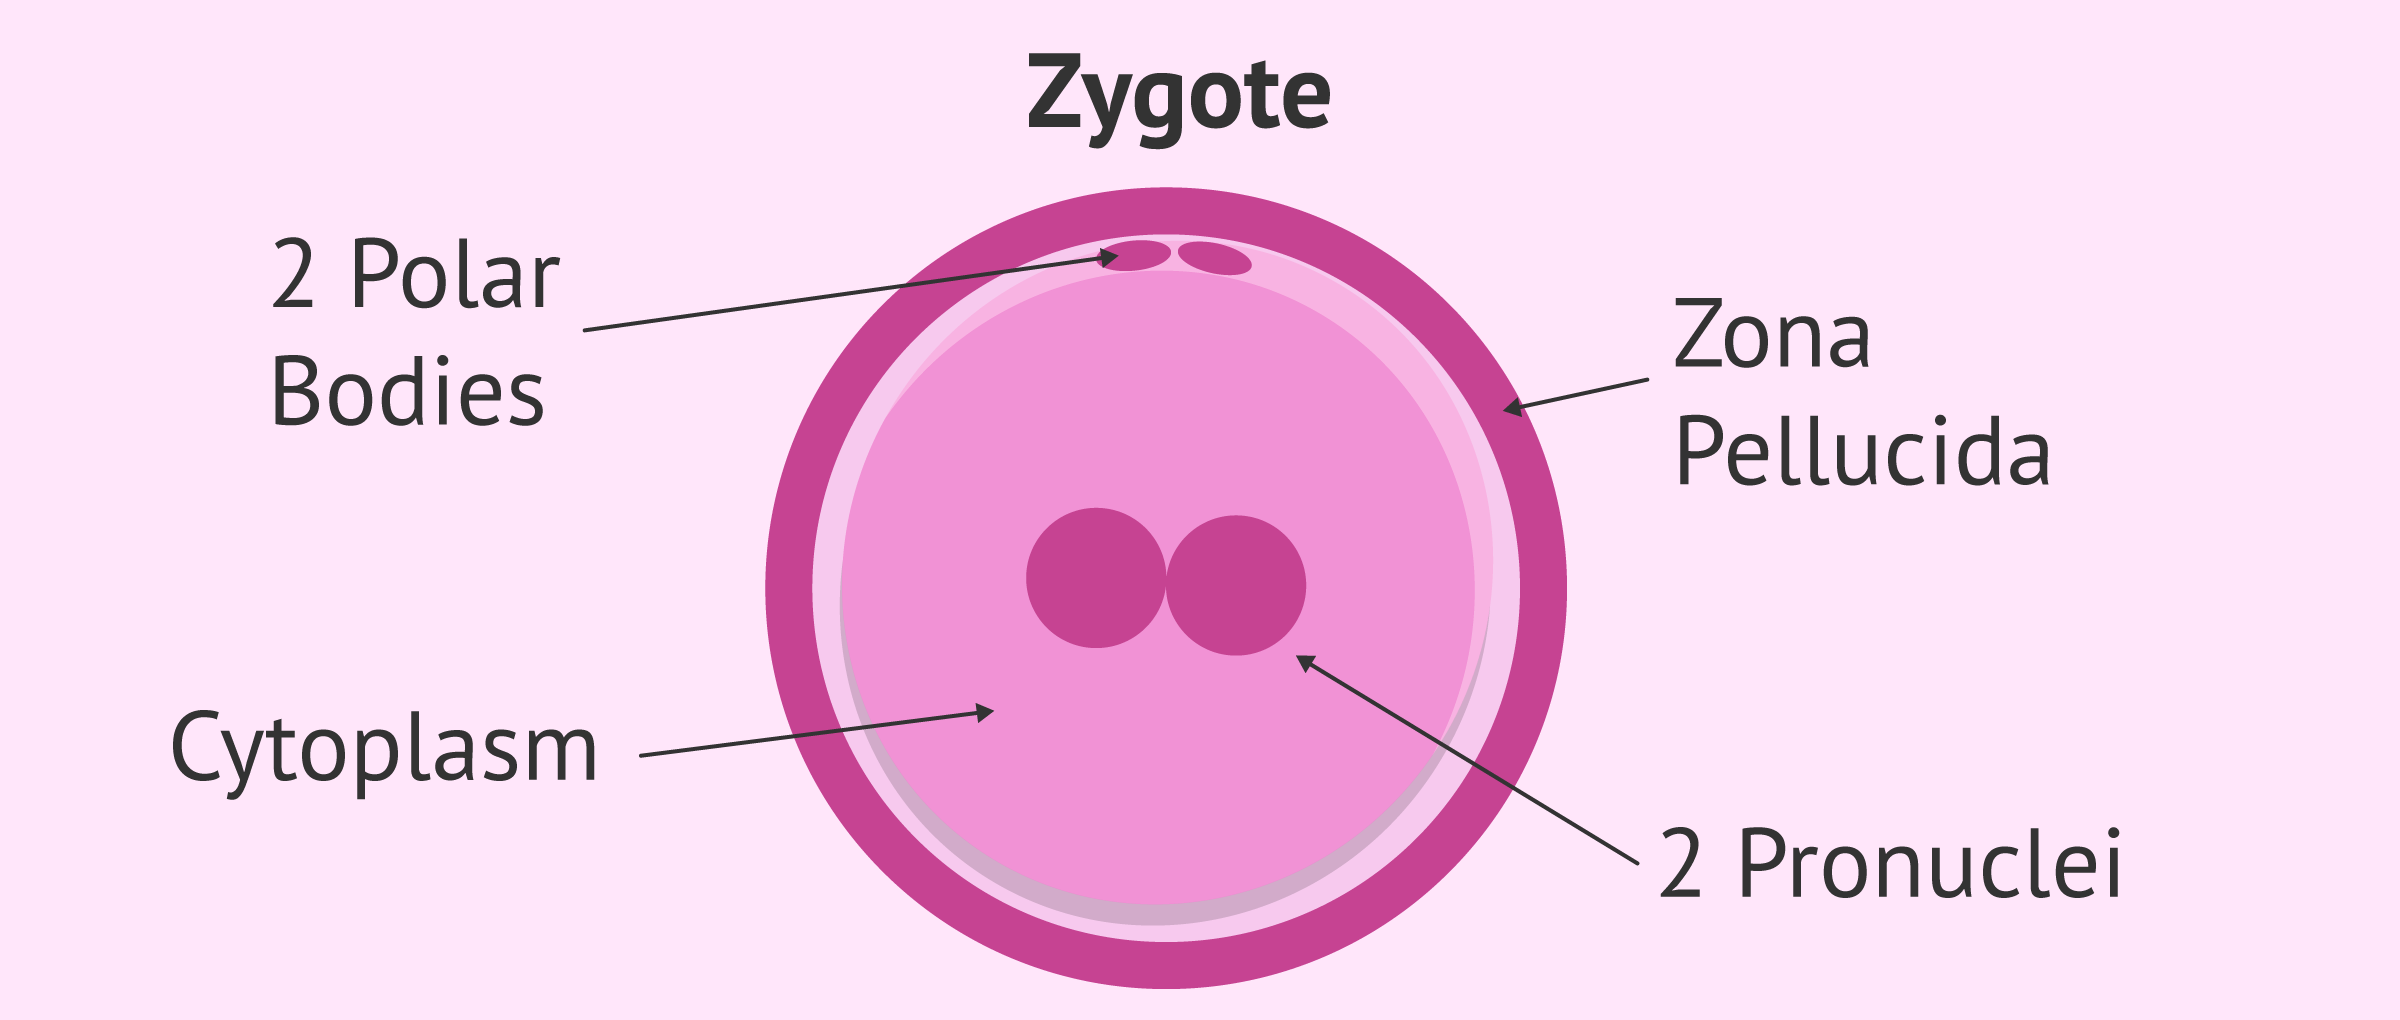 Structure of Zygote